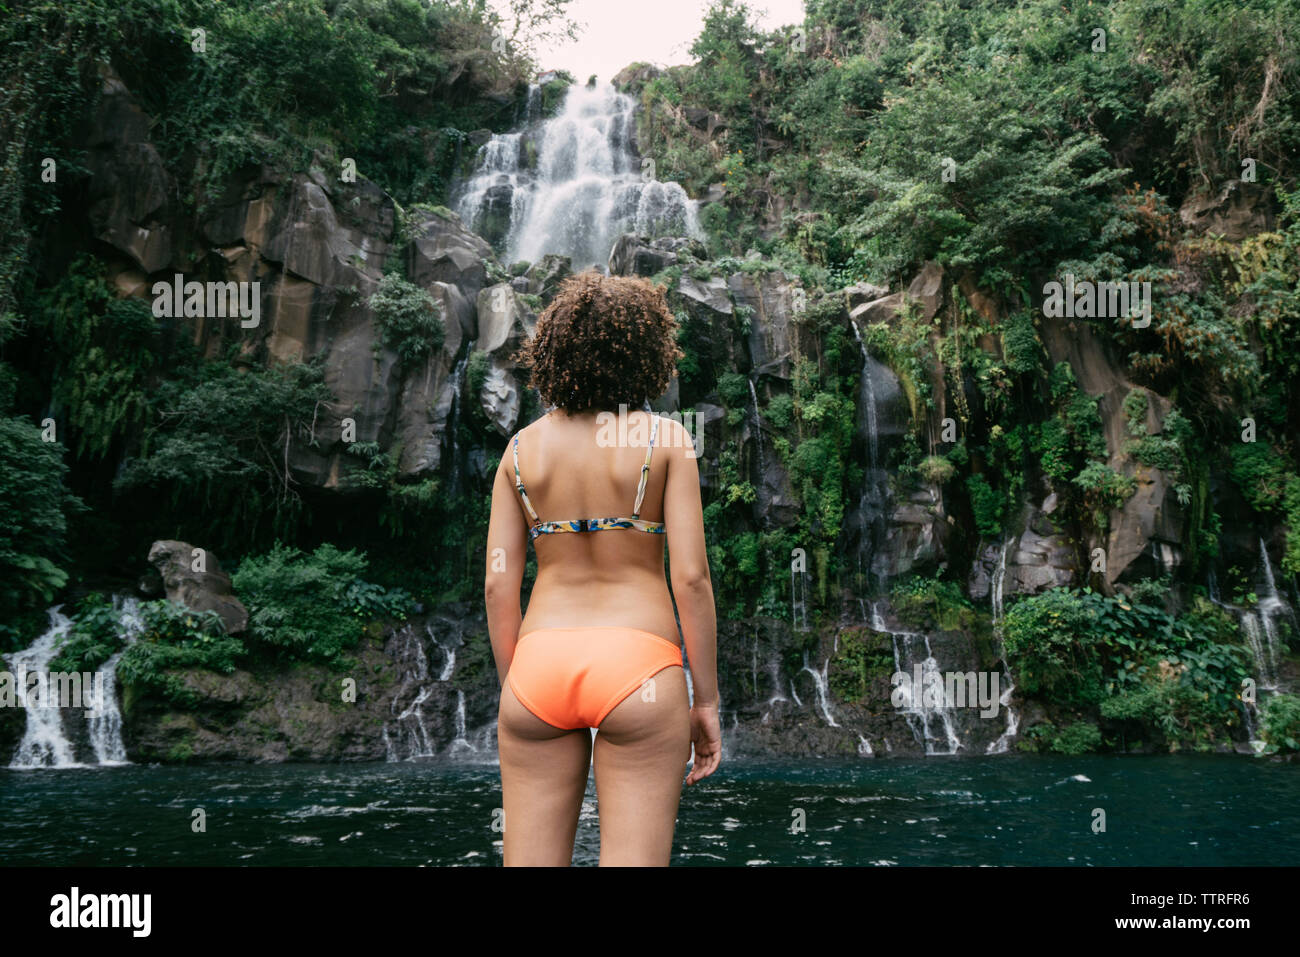 Rear view of young woman in bikini standing against waterfall at forest Stock Photo